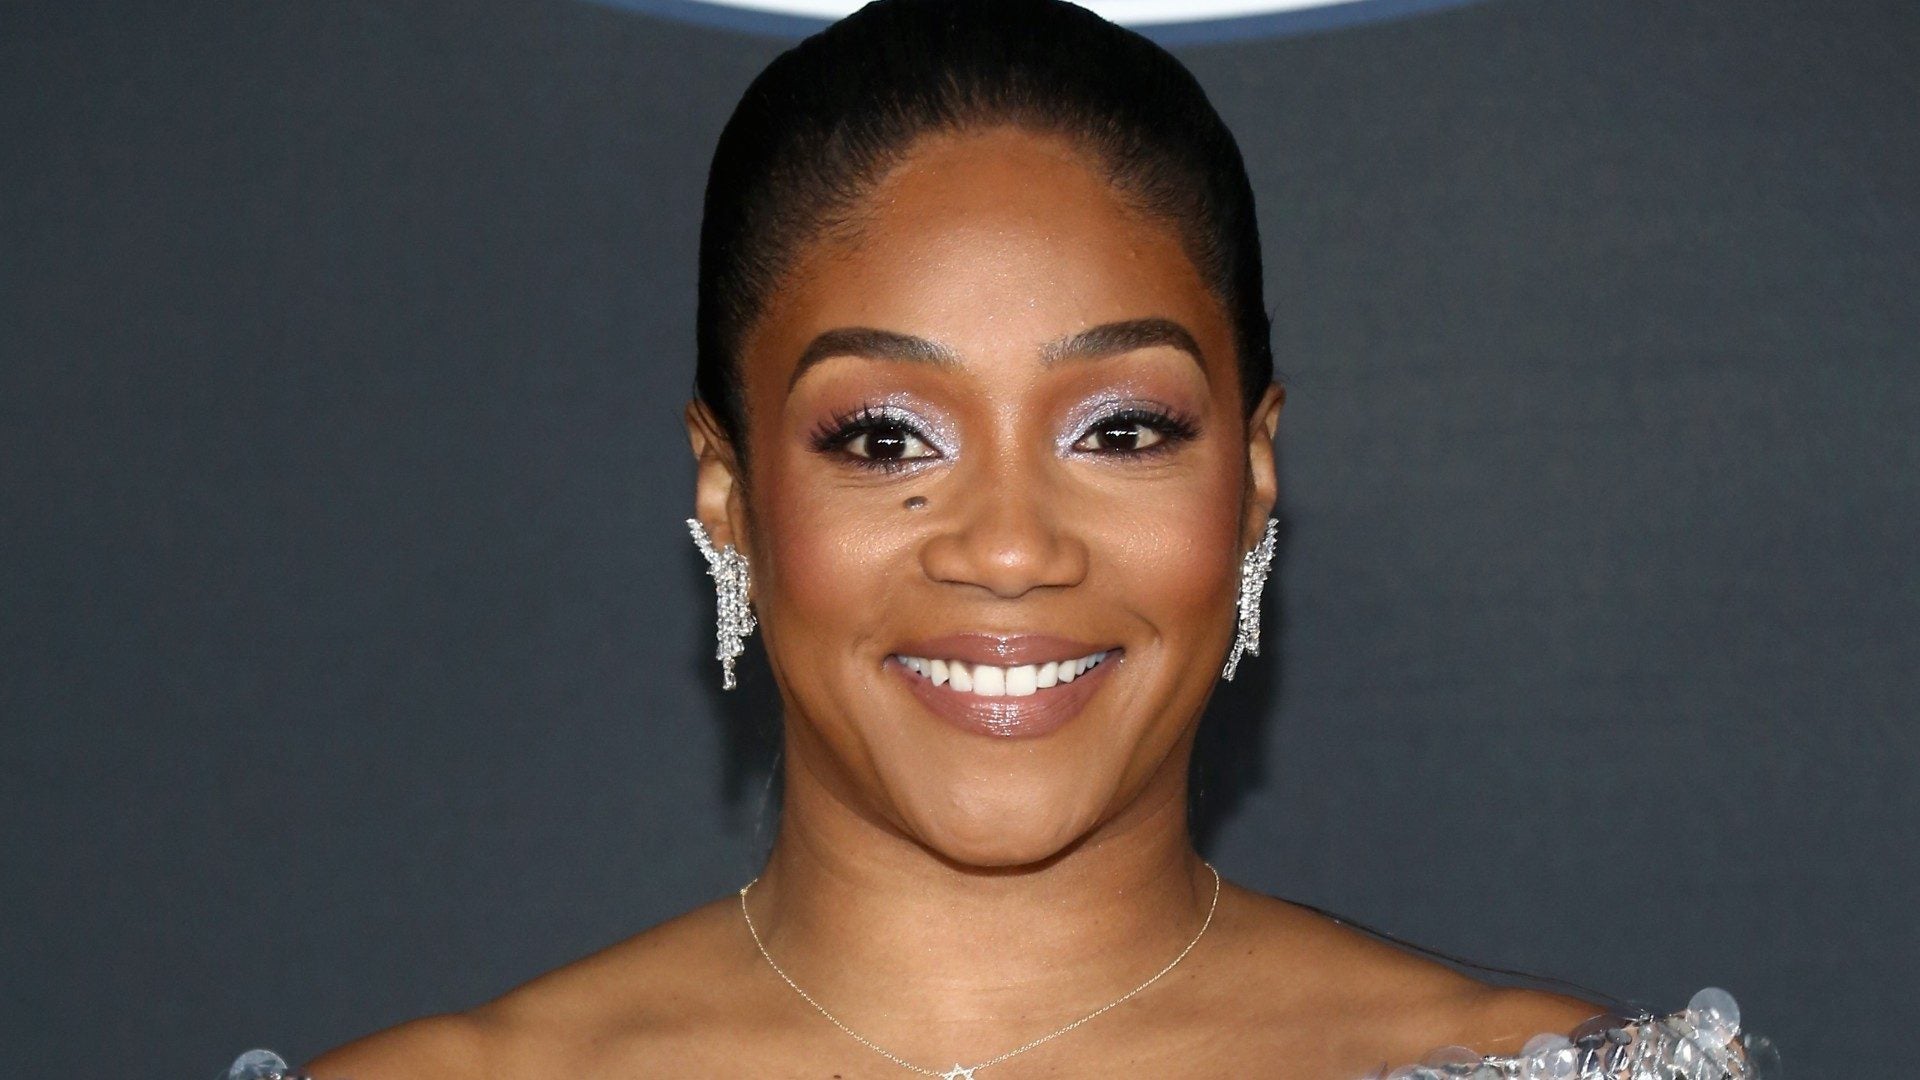 A Tearful Tiffany Haddish Says Racism Is Making Her Have Second Thoughts About Having Children